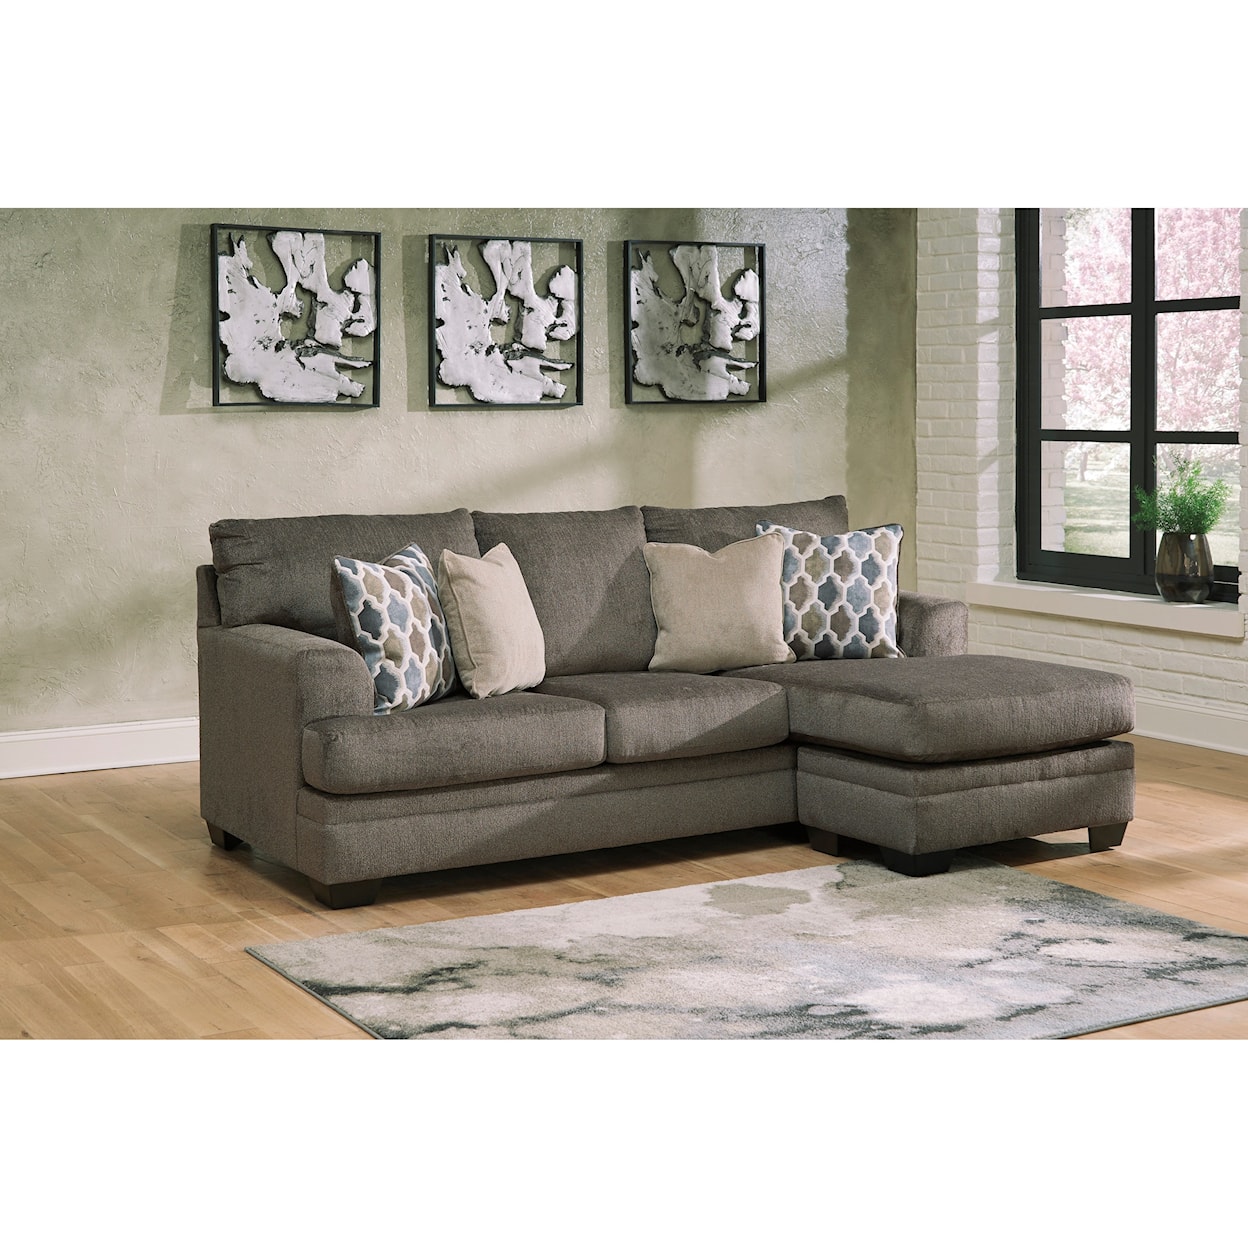 Signature Design by Ashley Furniture Dorsten Sofa with Chaise